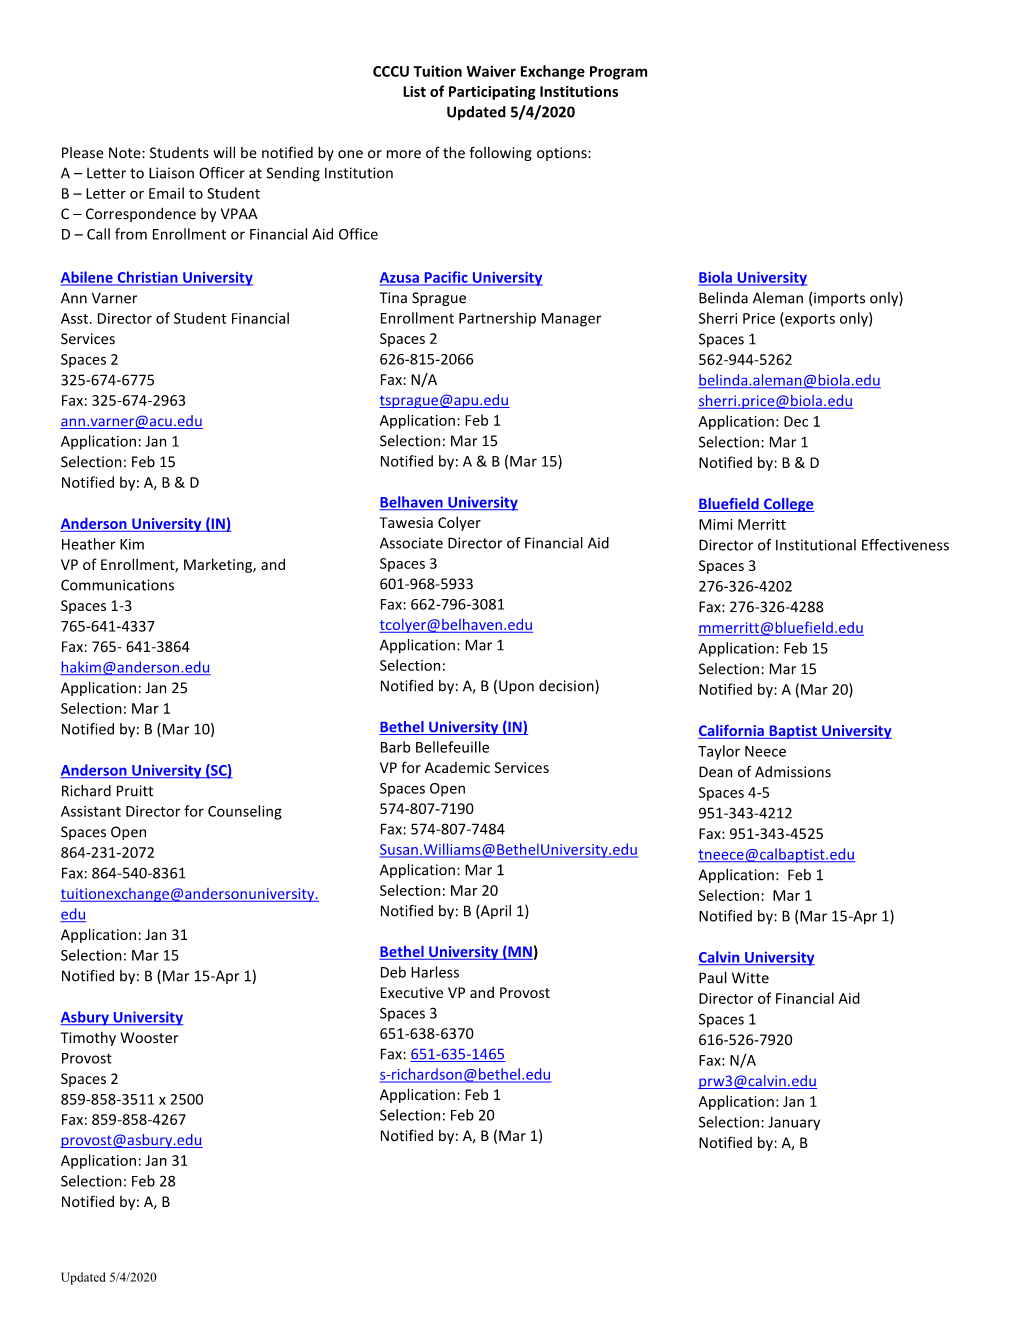 CCCU Tuition Waiver Exchange Program List of Participating Institutions Updated 5/4/2020